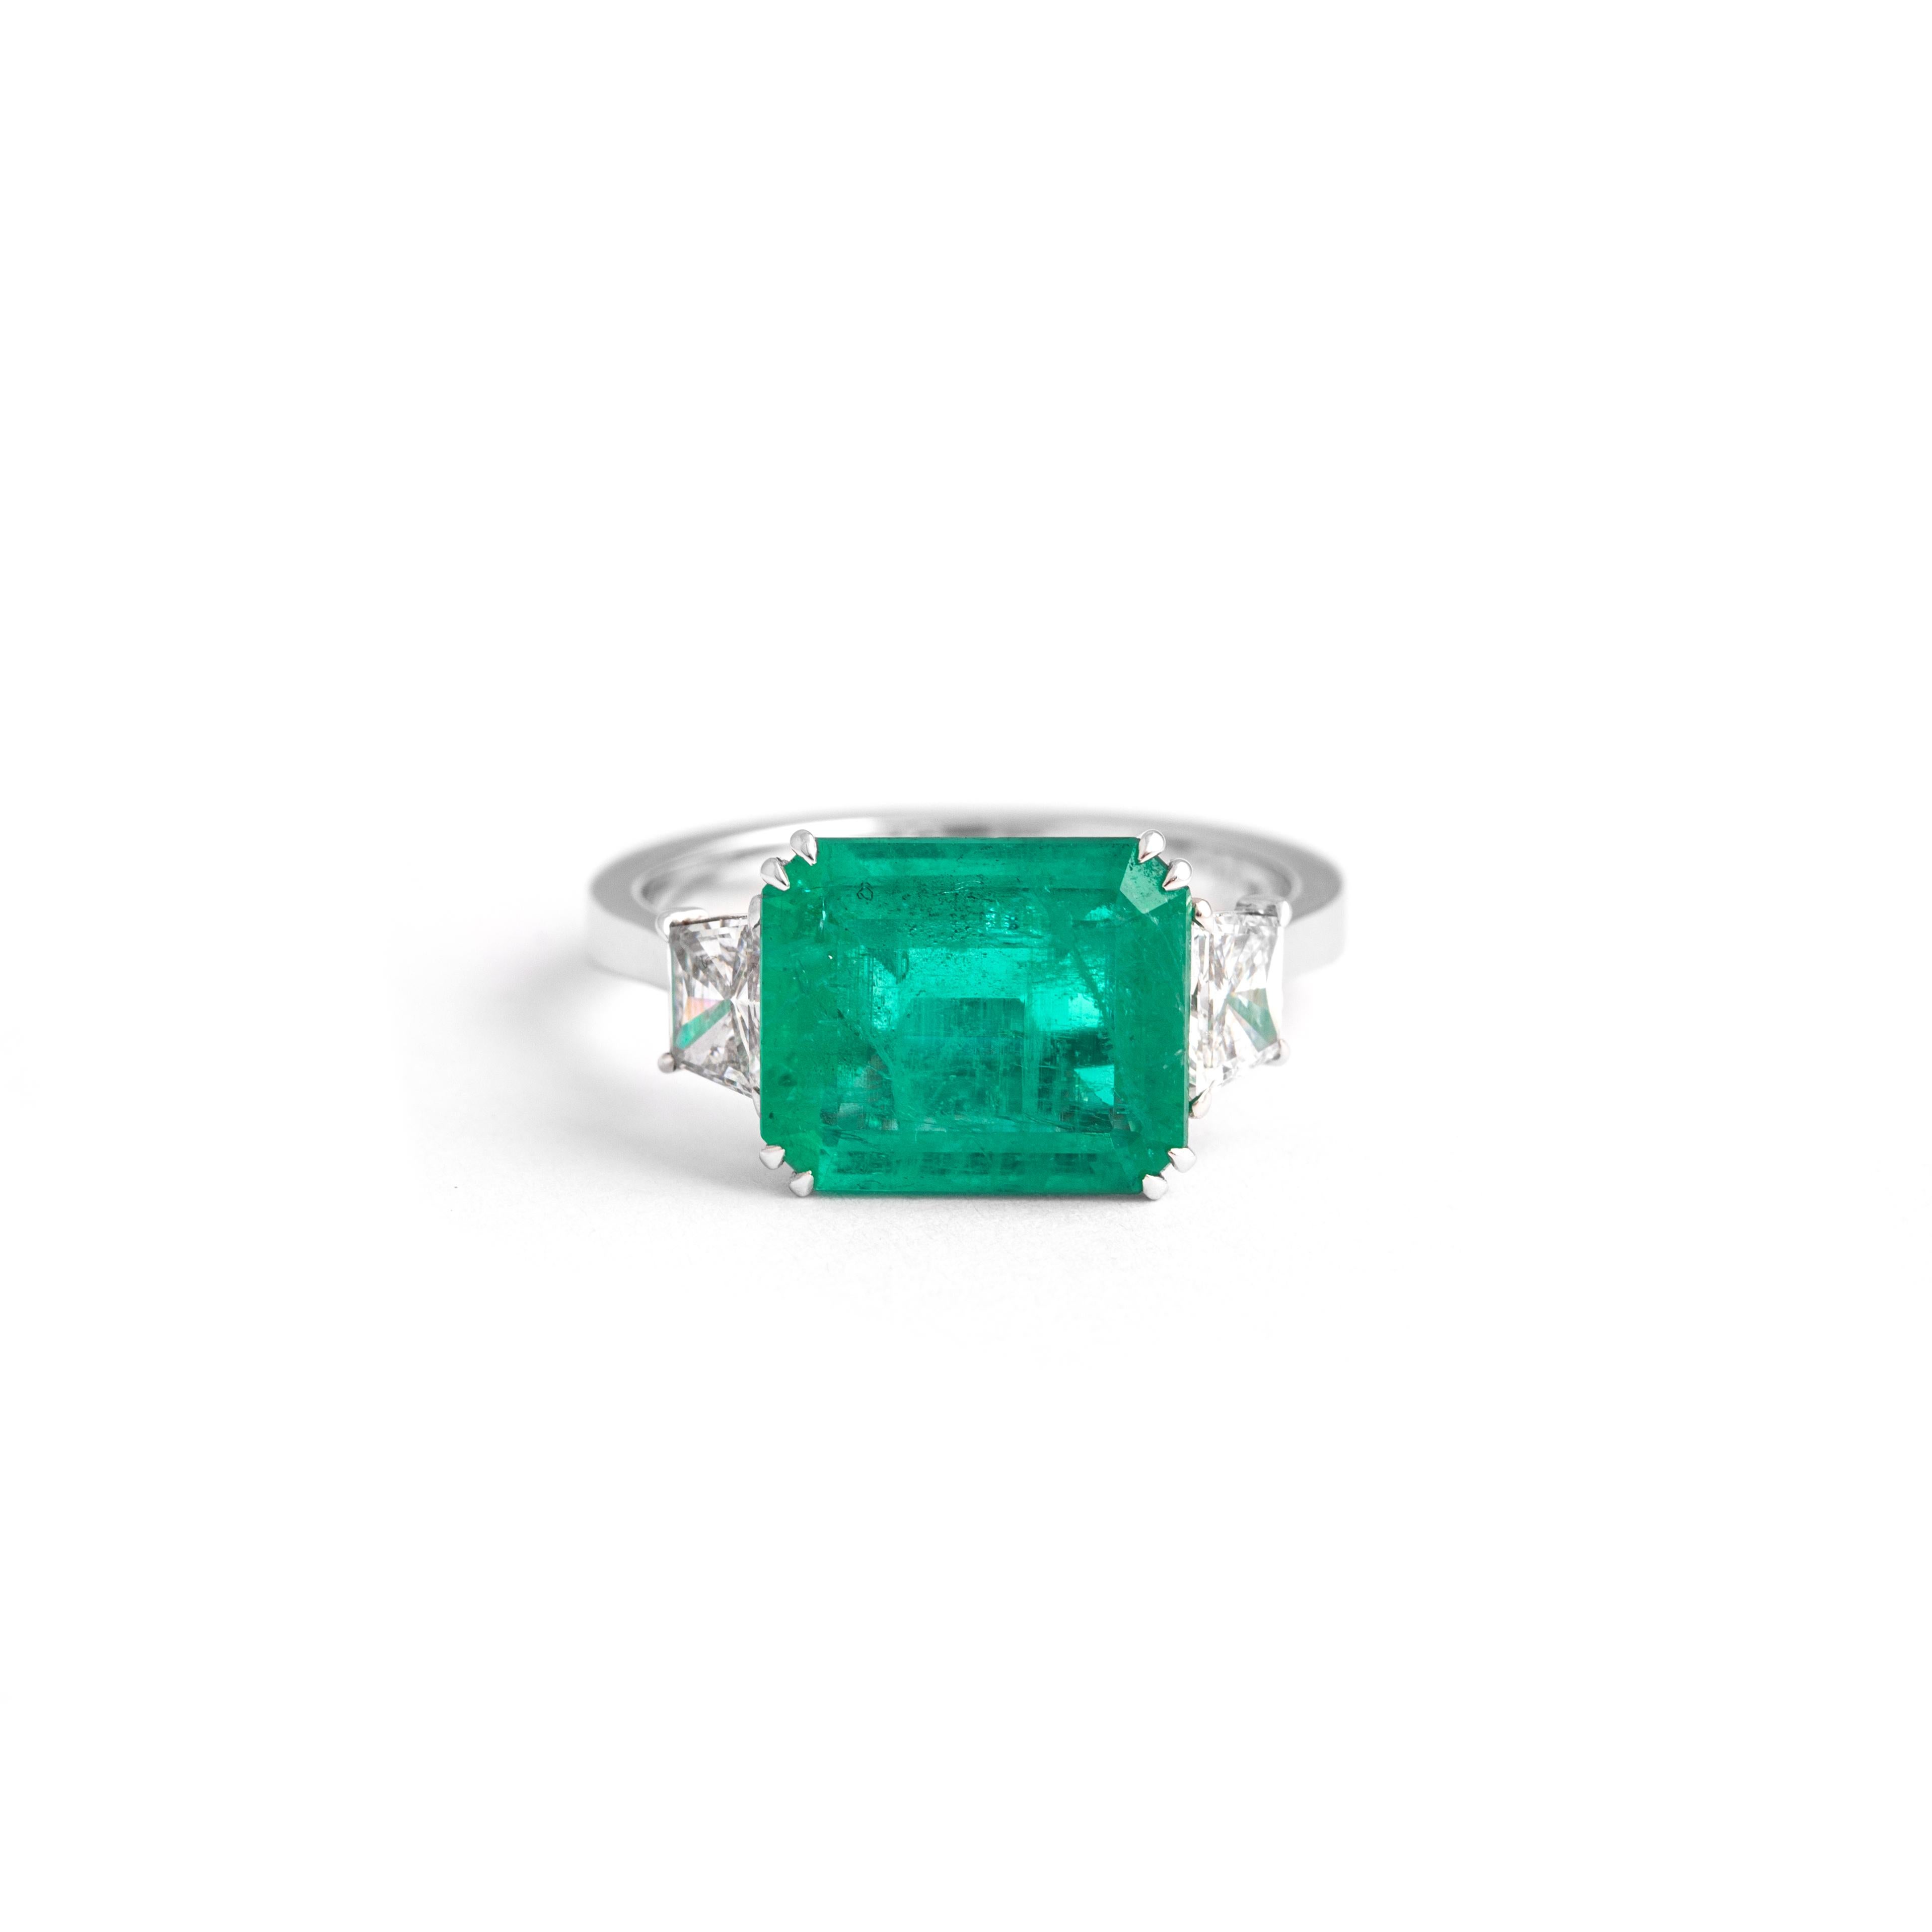 3.25 carat Colombian Emerald ring, GRS certified, minor to moderate, flanked with a pair of Trap brilliant cut 0.67 carats E/VS diamond, 3.9 grams. 
WG
Weight: 4.83 grams.
Size: 54